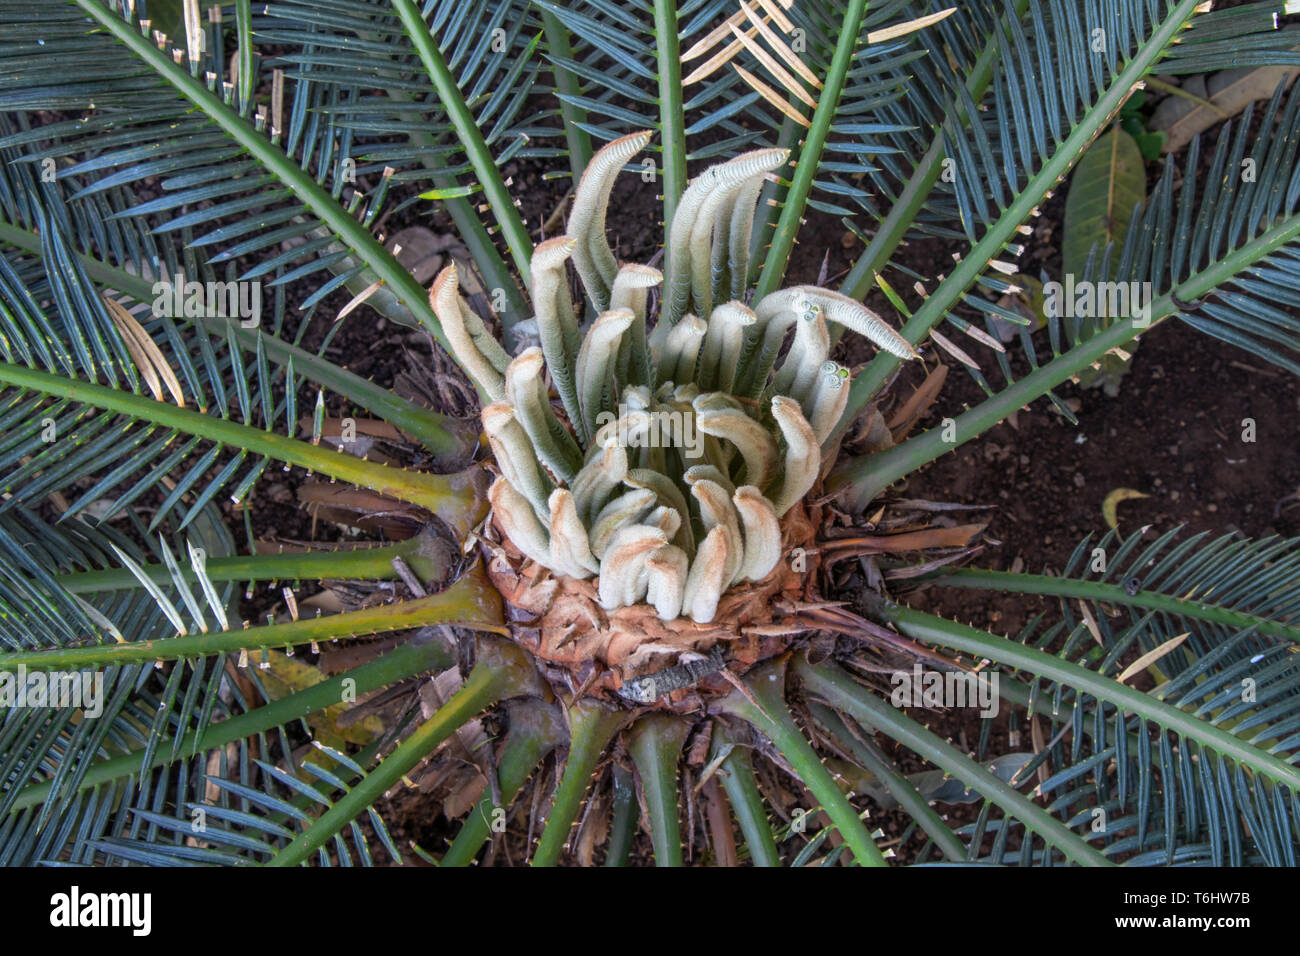 SAGO Palm, Cycas plant bud cones converting into new leafs Stock Photo